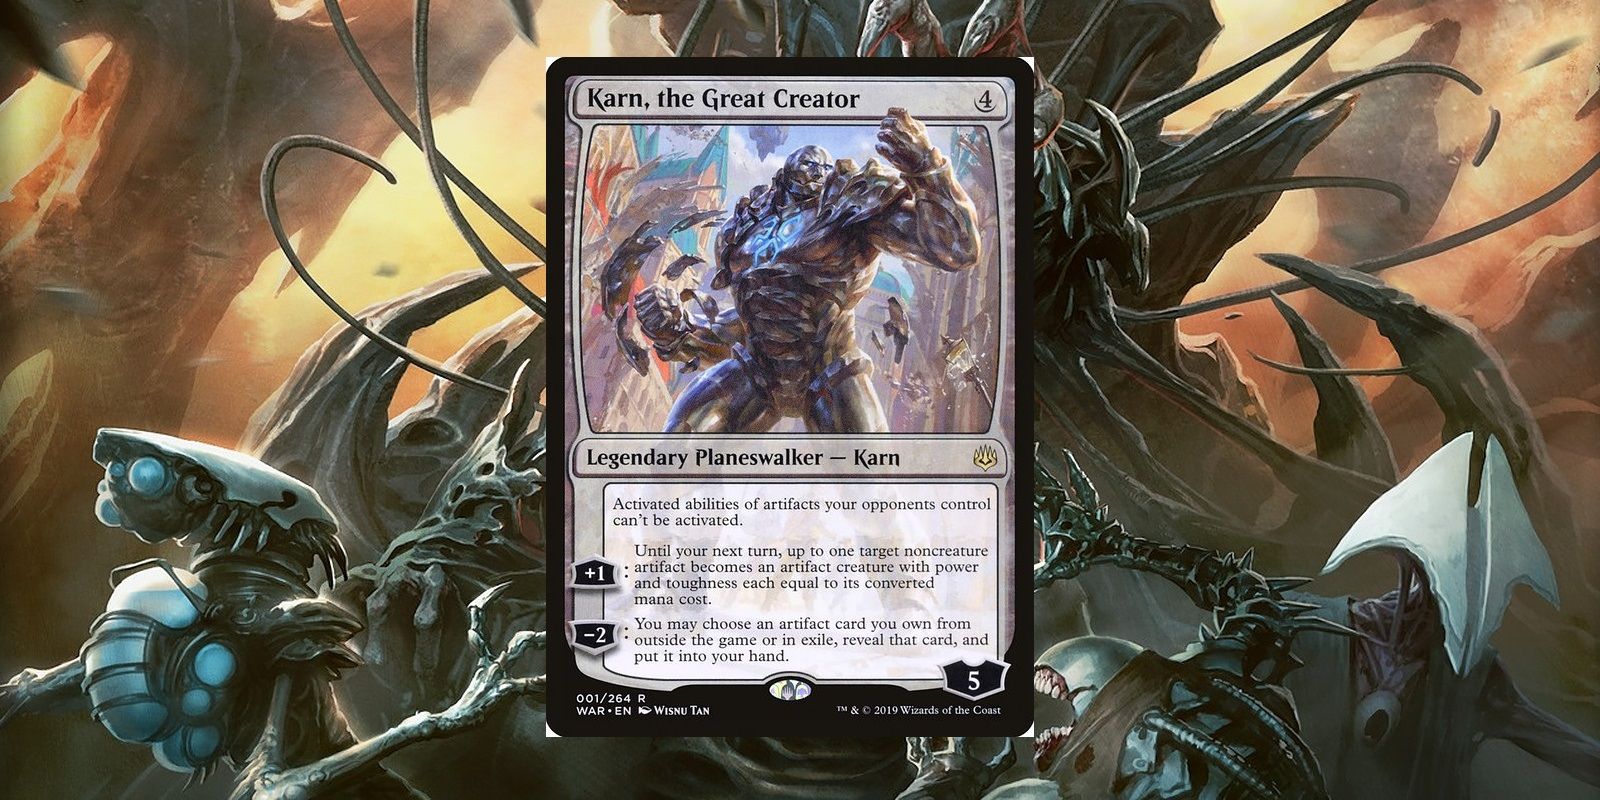 Karn, the Great Creator planeswalker card from Magic: The Gathering